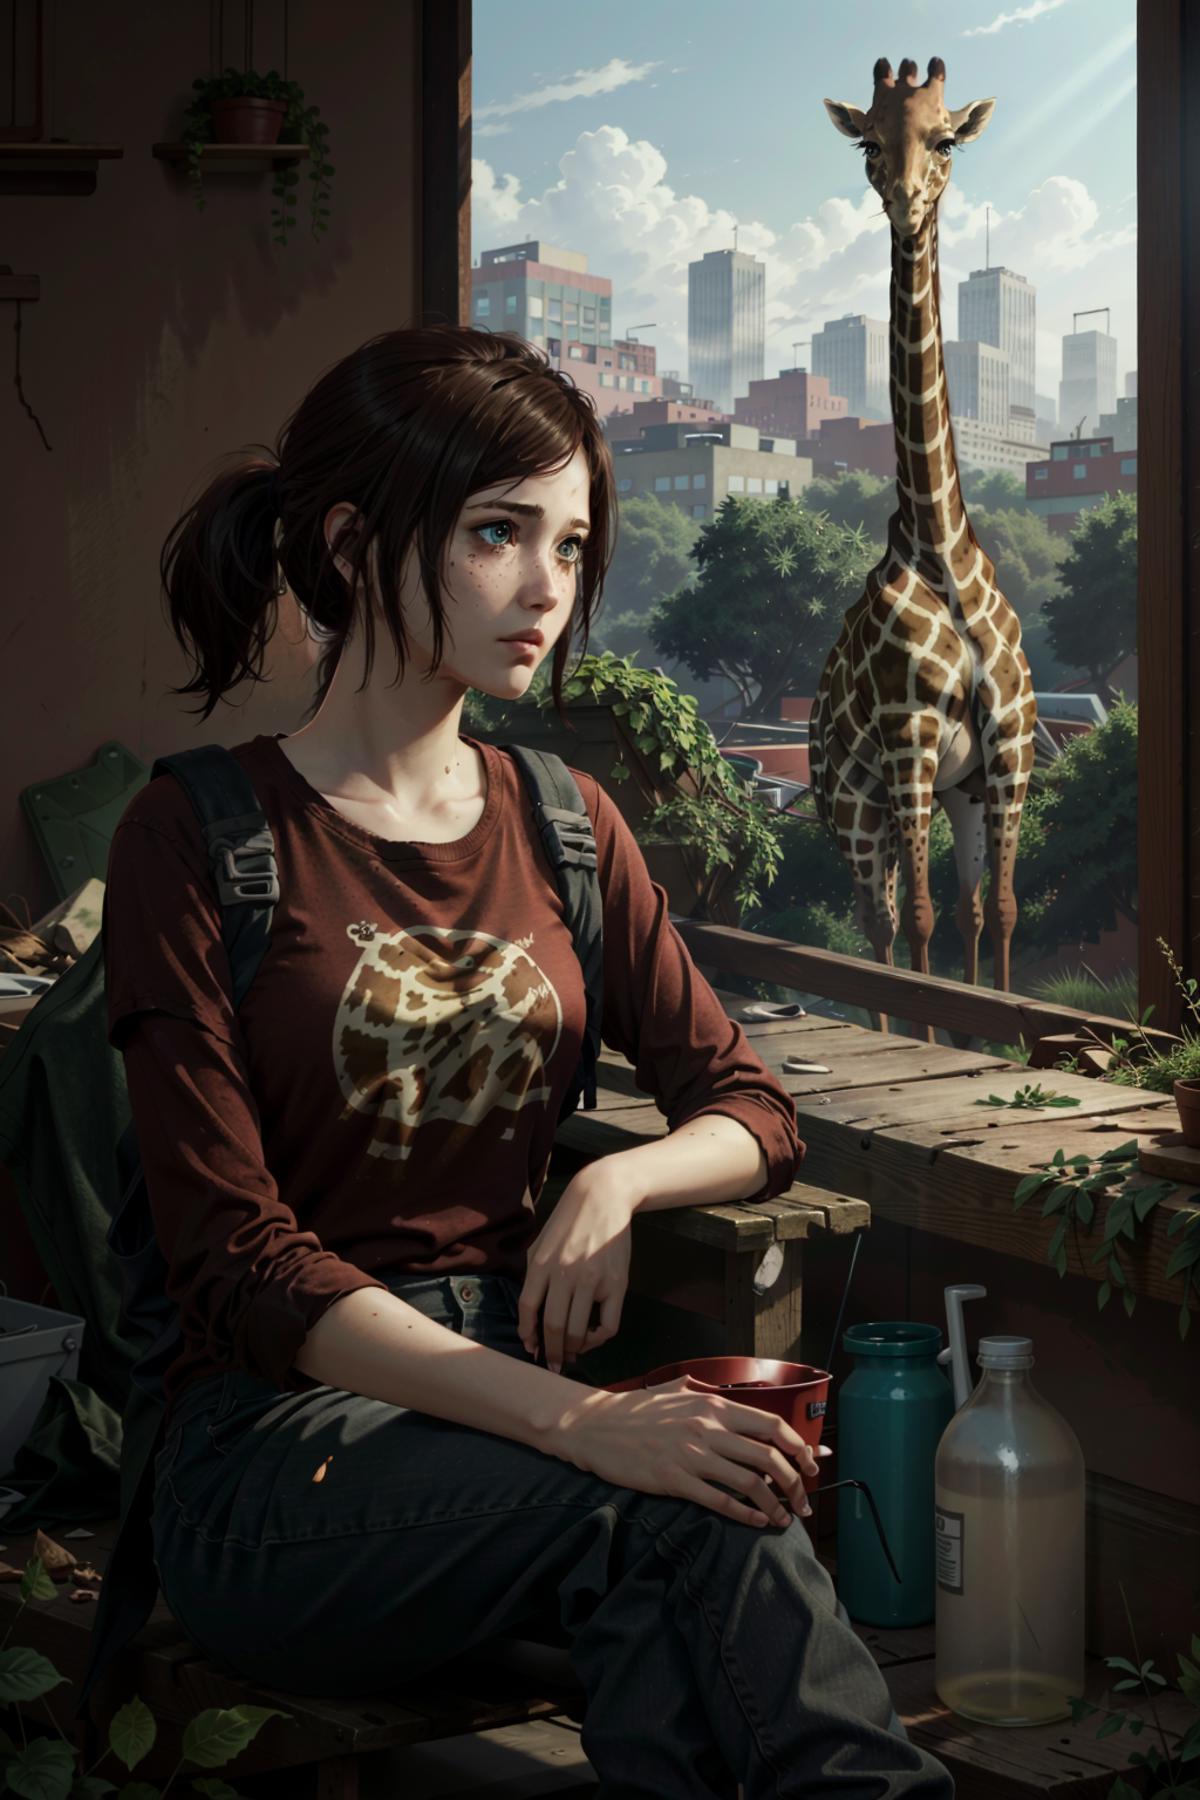 Ellie from The Last of Us image by Ellie_Williams